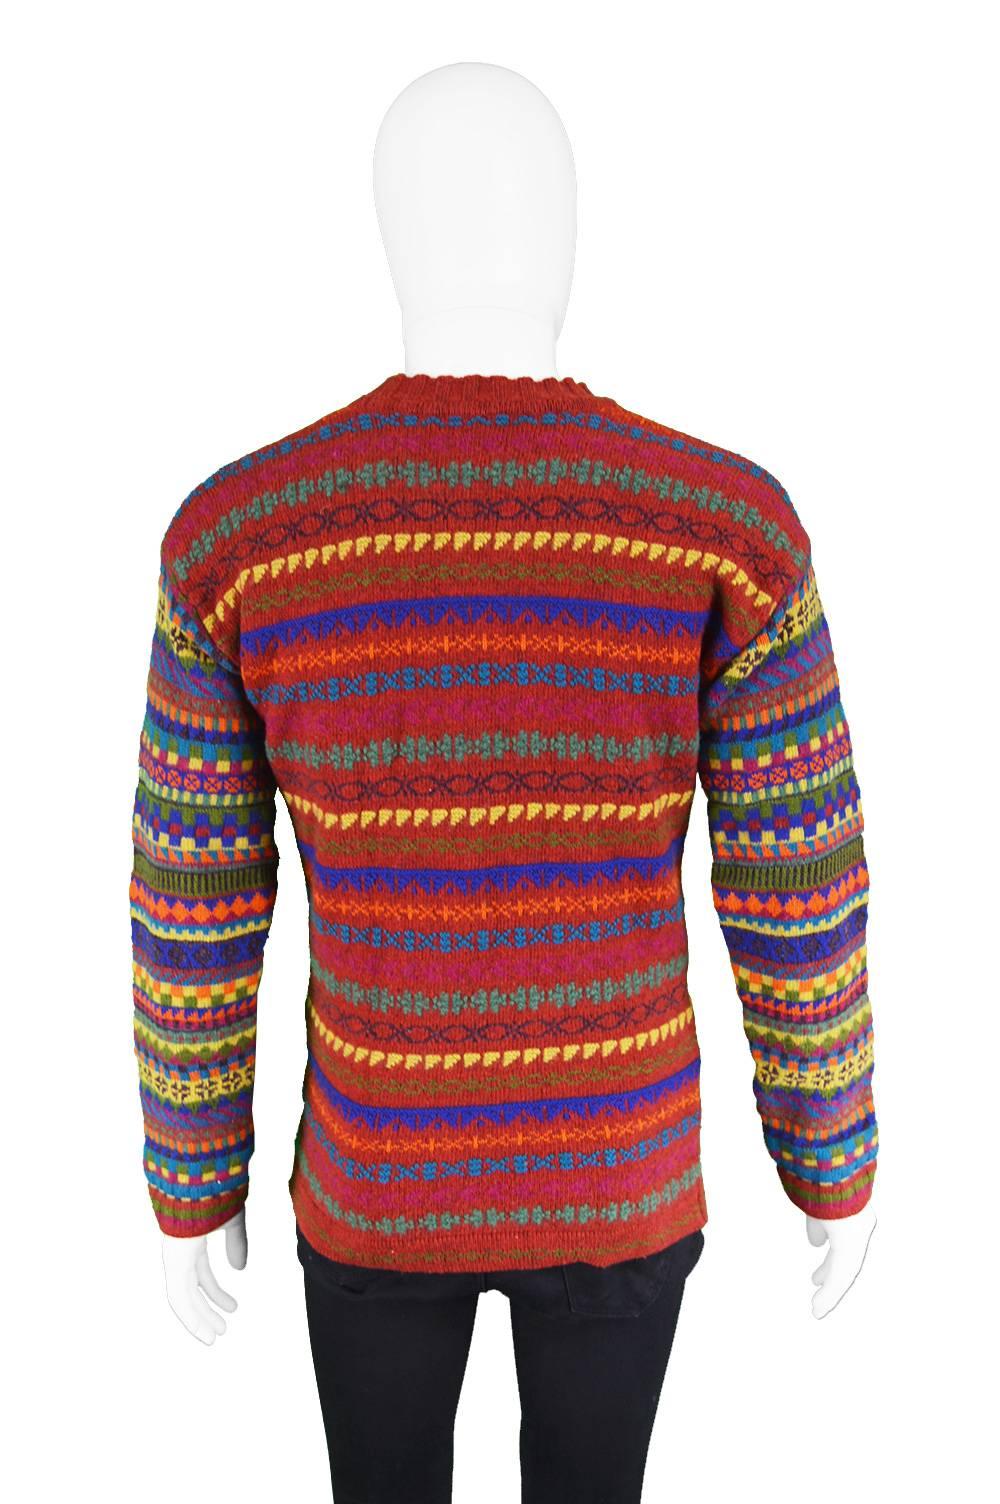 Kenzo Homme Men's Red Geometric Knit Vintage Panelled Sweater, 1980s For Sale 3